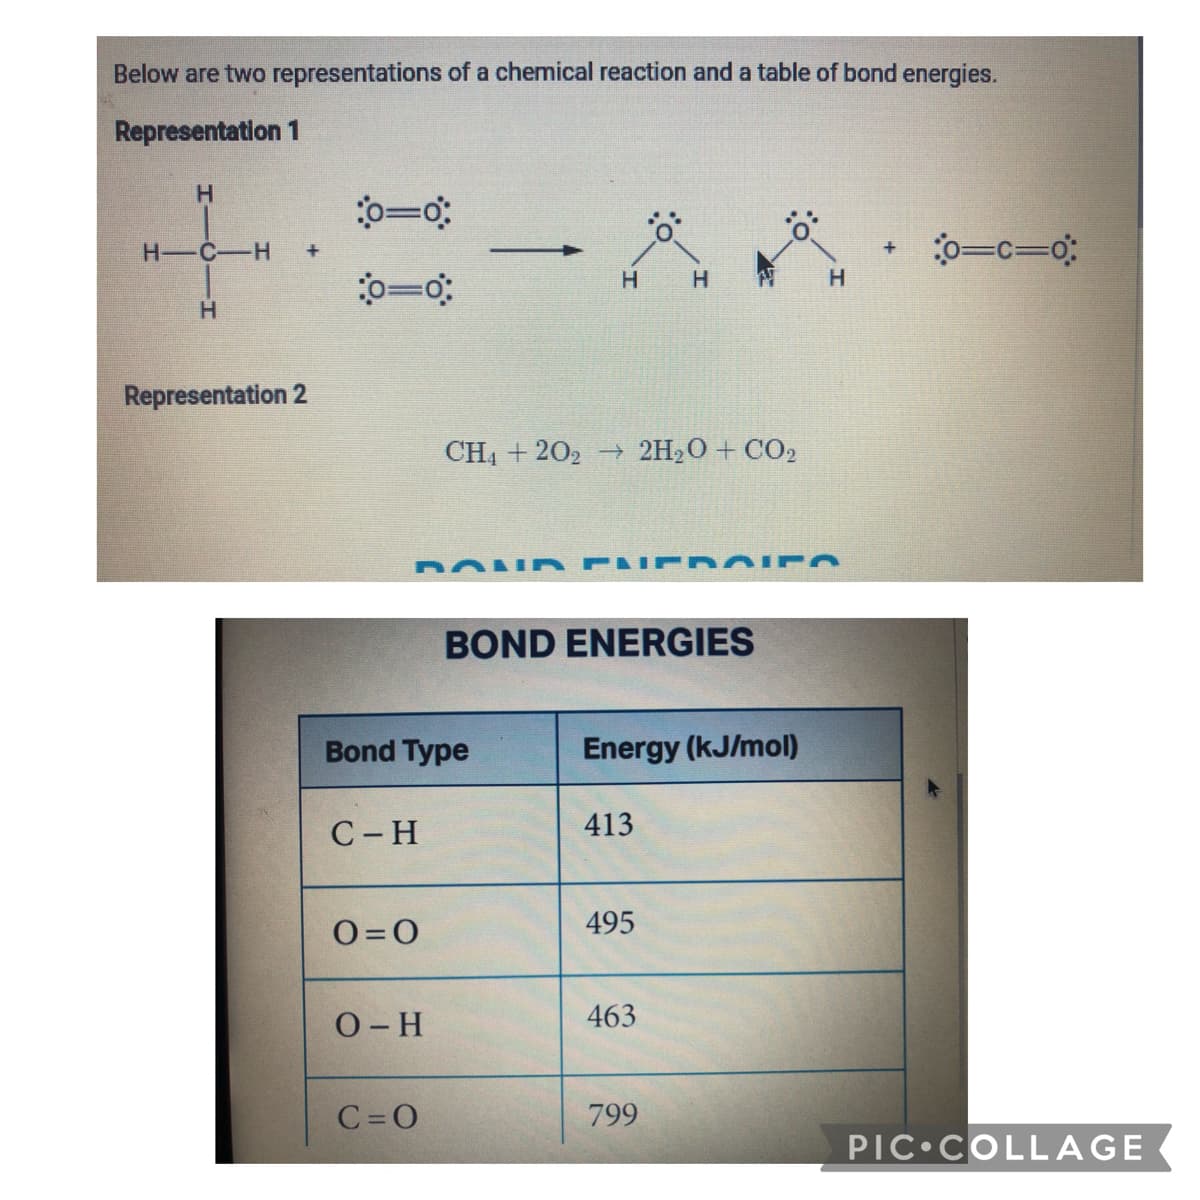 Below are two representations of a chemical reaction and a table of bond energies.
Representation 1
H.
H-C-H
H.
H
H.
Representation 2
CH4 + 202 → 2H2O + CO2
BOND ENERGIES
Bond Type
Energy (kJ/mol)
C-H
413
O=0
495
O-H
463
C=0
799
PIC COLLAGE
